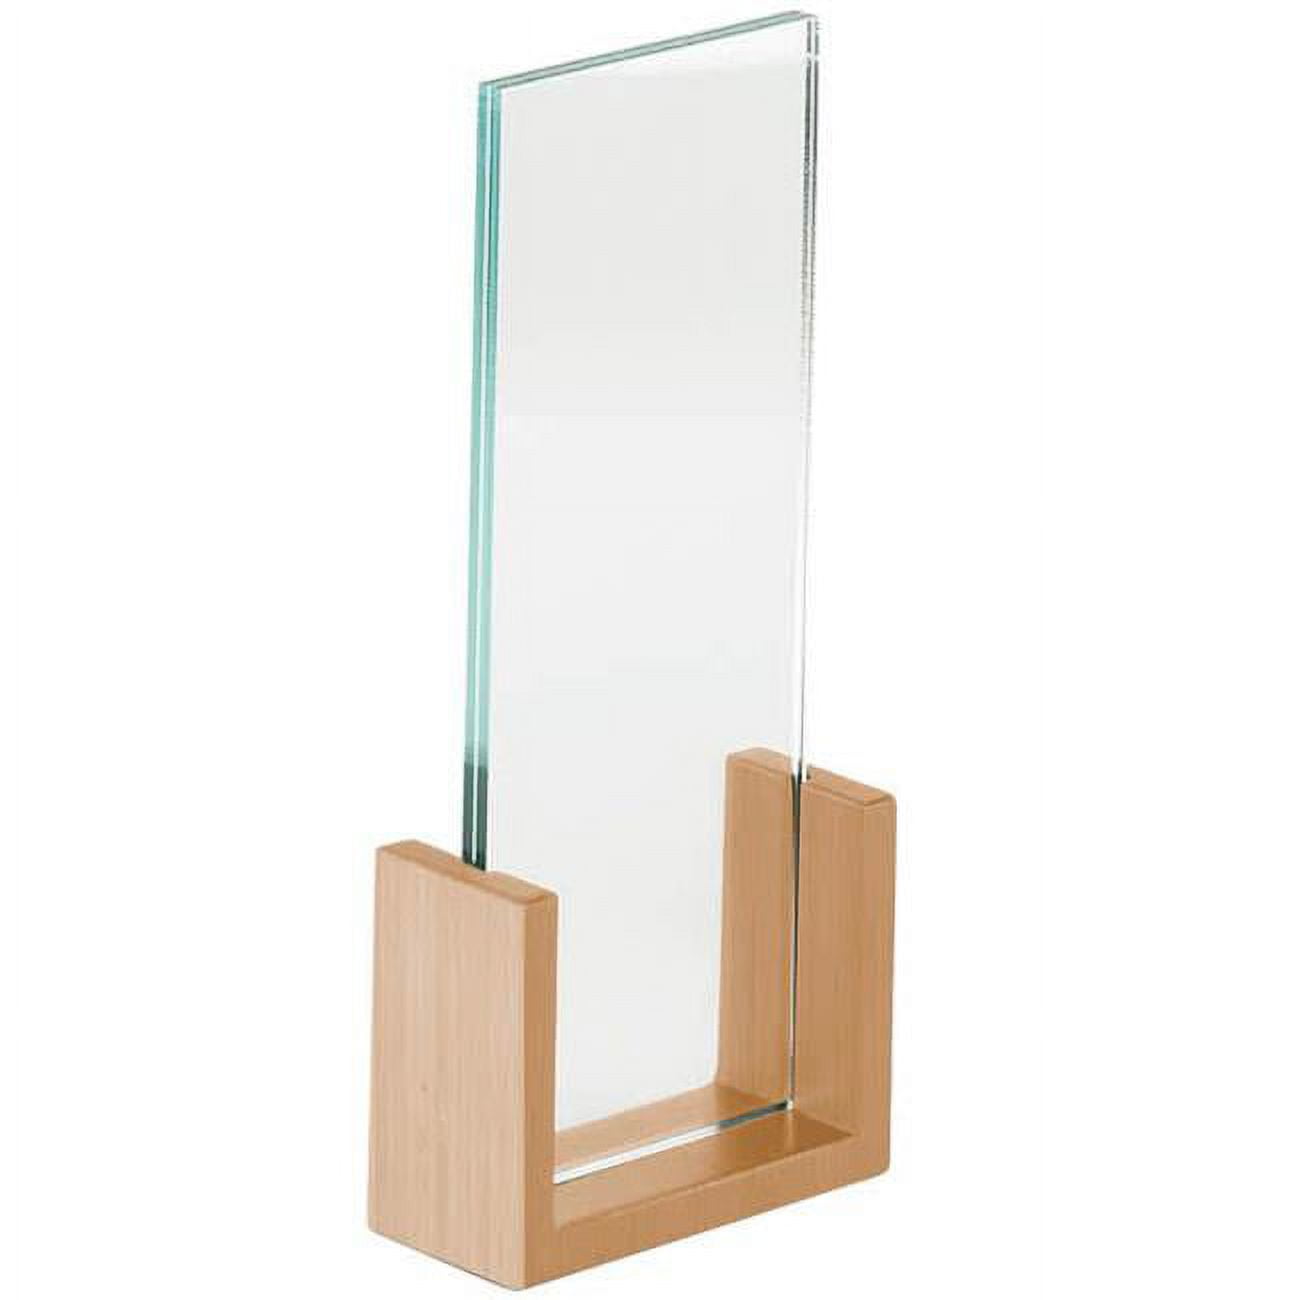 1510-411-60 U-style Menu & Card Holder With Bamboo Frame - 5 X 1.5 X 12 In.